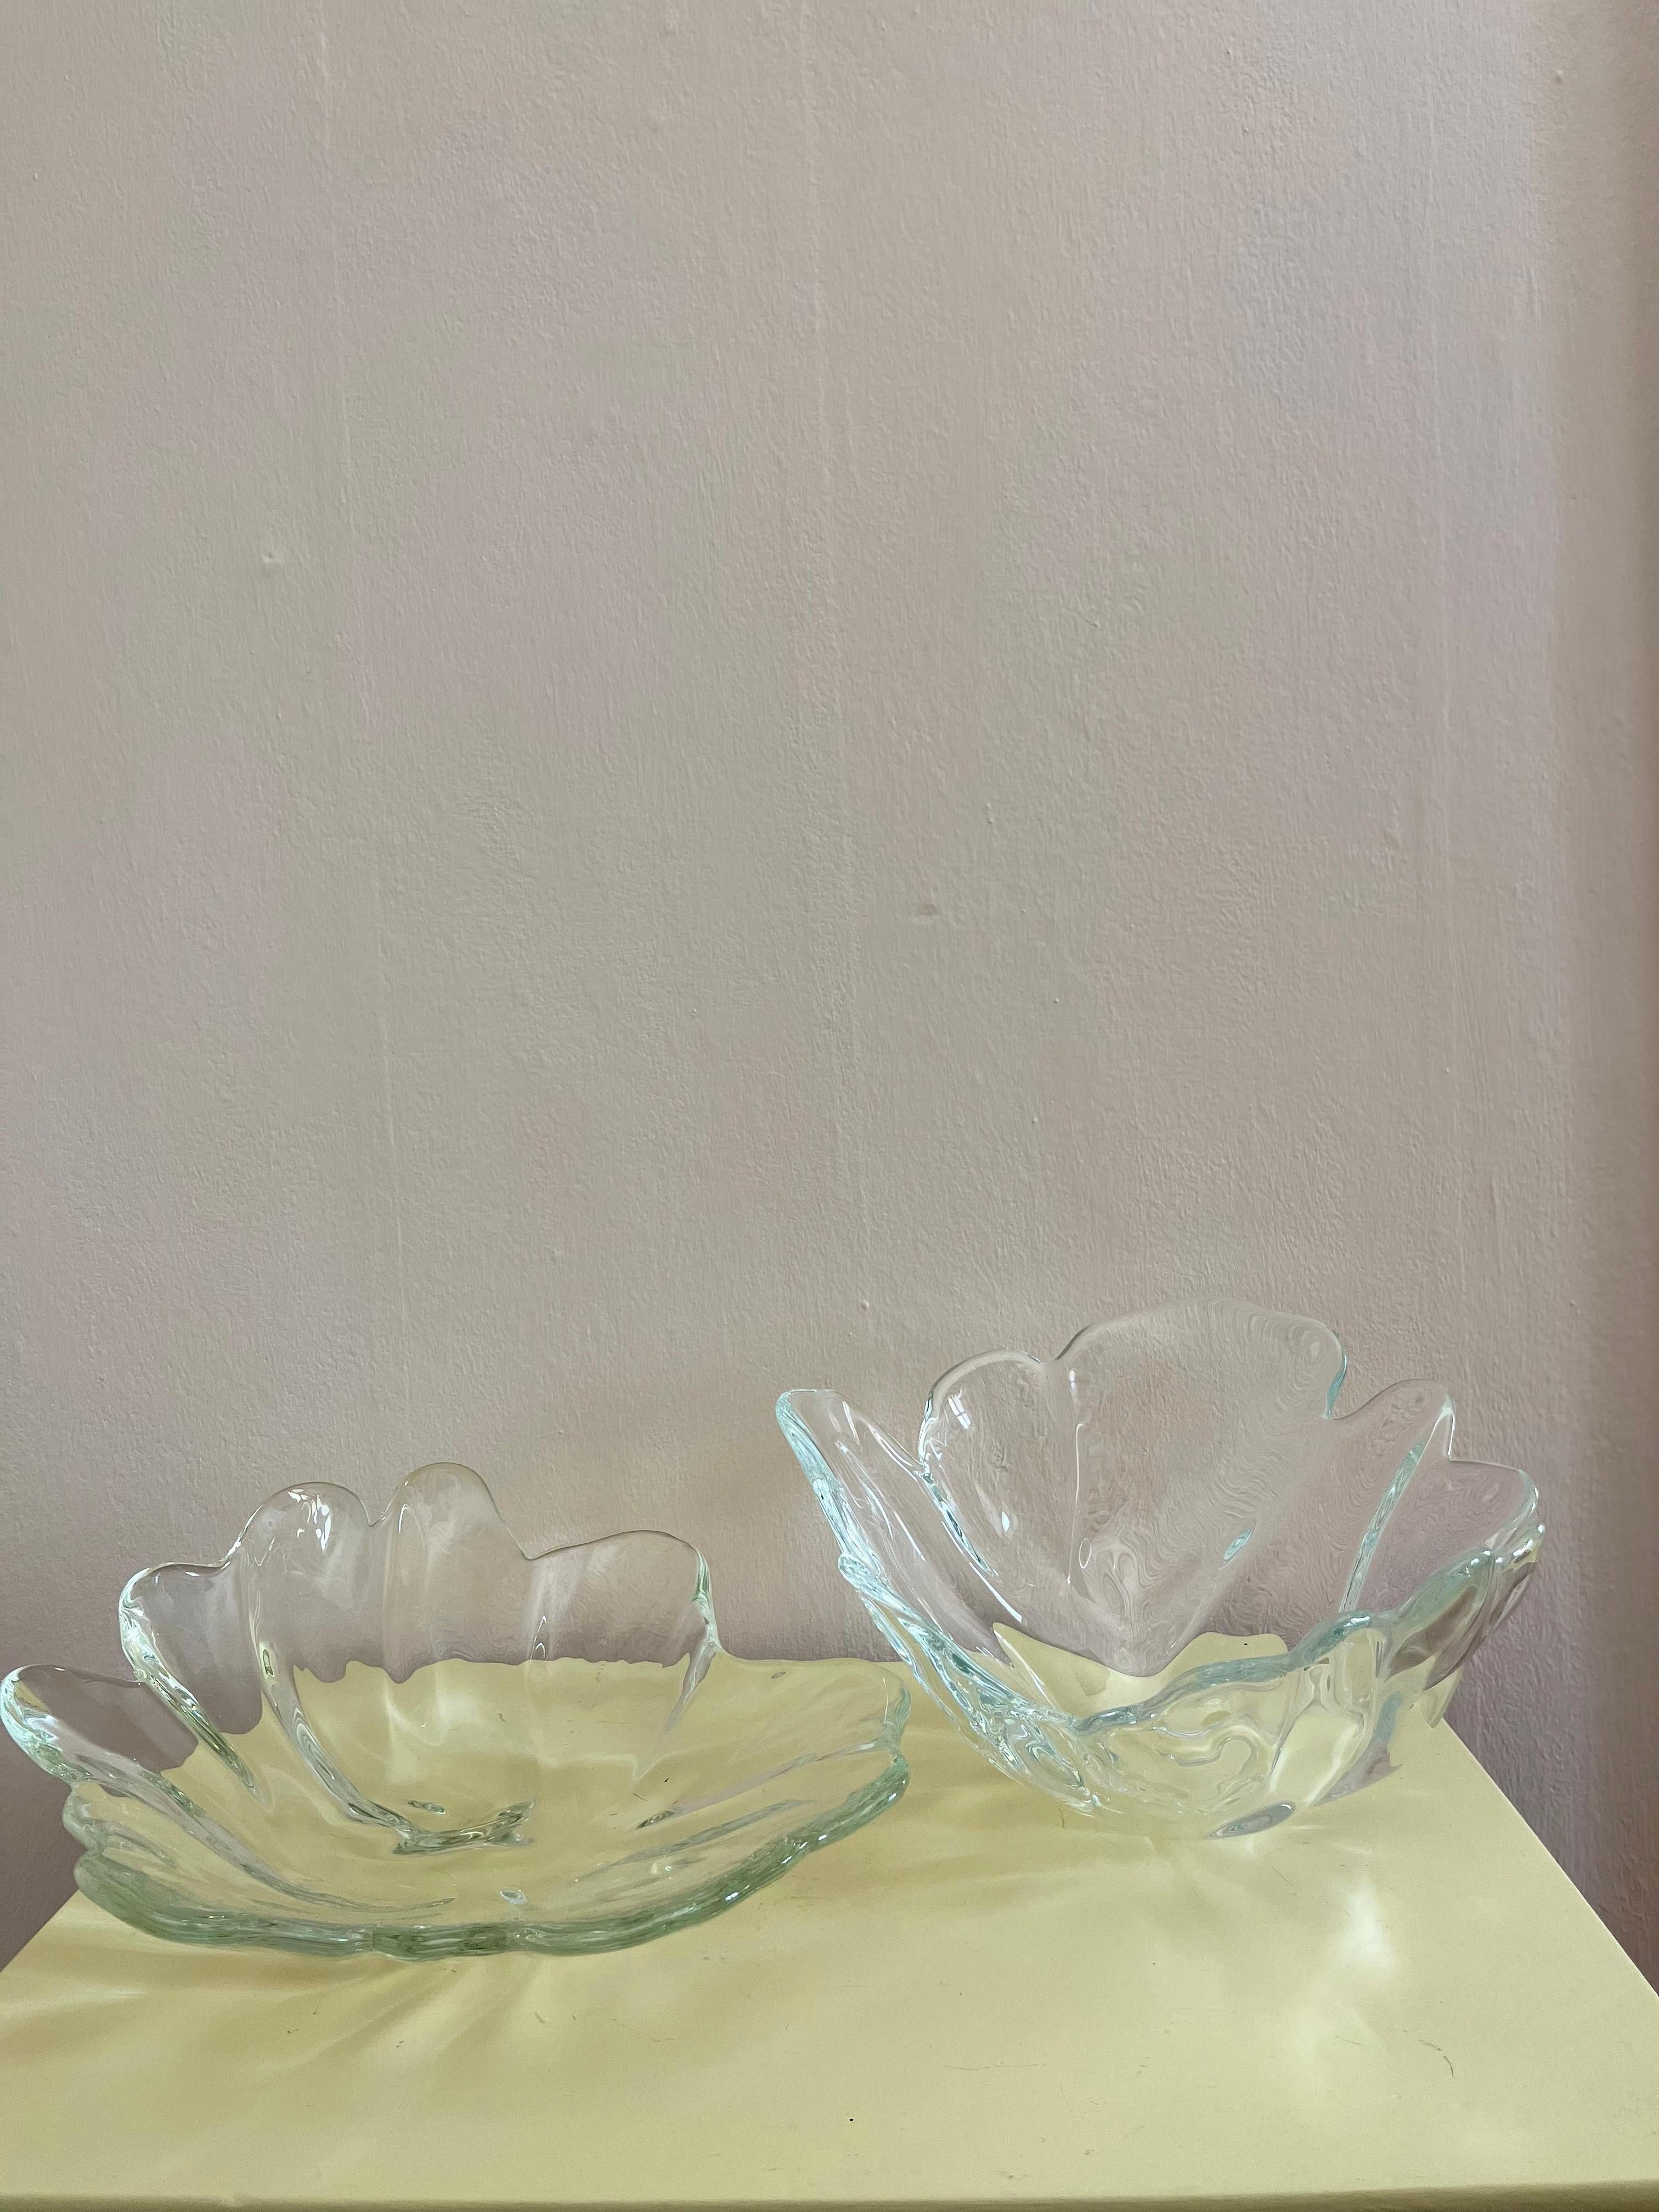 Set of organic shaped dishes by Ole Kortzau for Holmegaard in heavy glass

Set of organic shaped dishes by Ole Kortzau for Holmegaard in heavy glass. From the series Natura created in Denmark in 1996. Both in good condition, no flaws. 

The lower